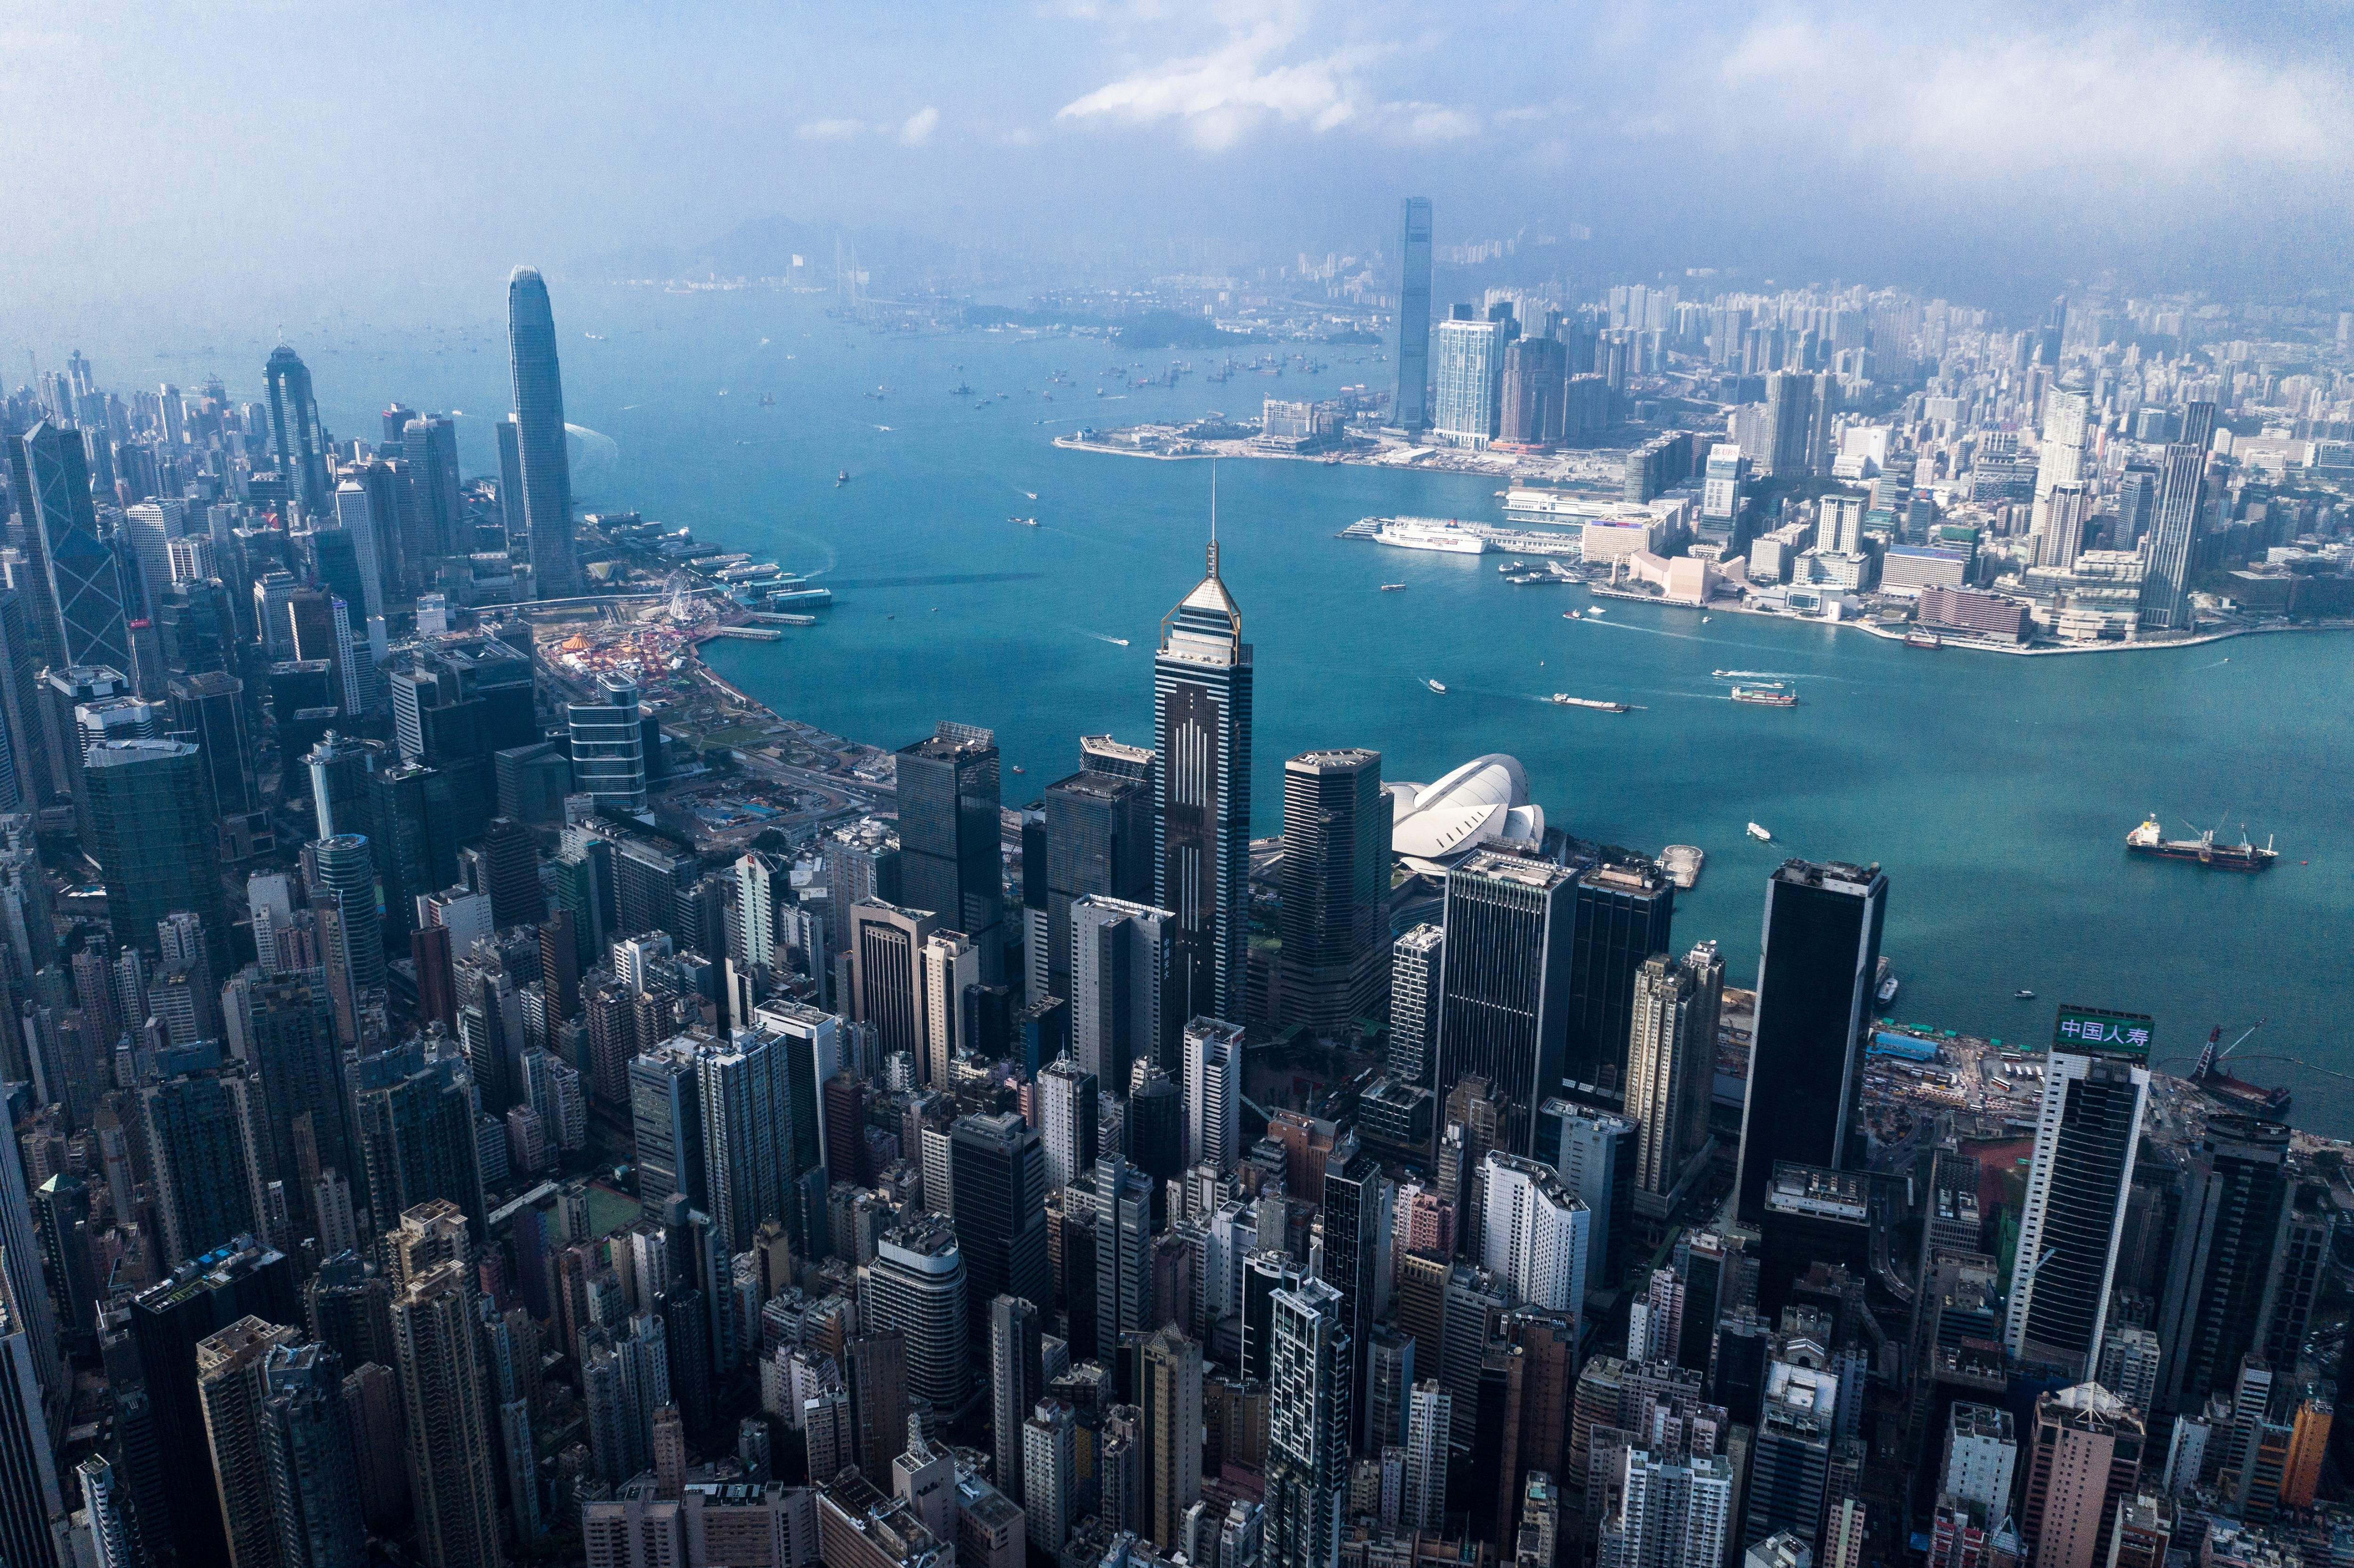 In recent years, Hong Kong has been subject to China extending its control